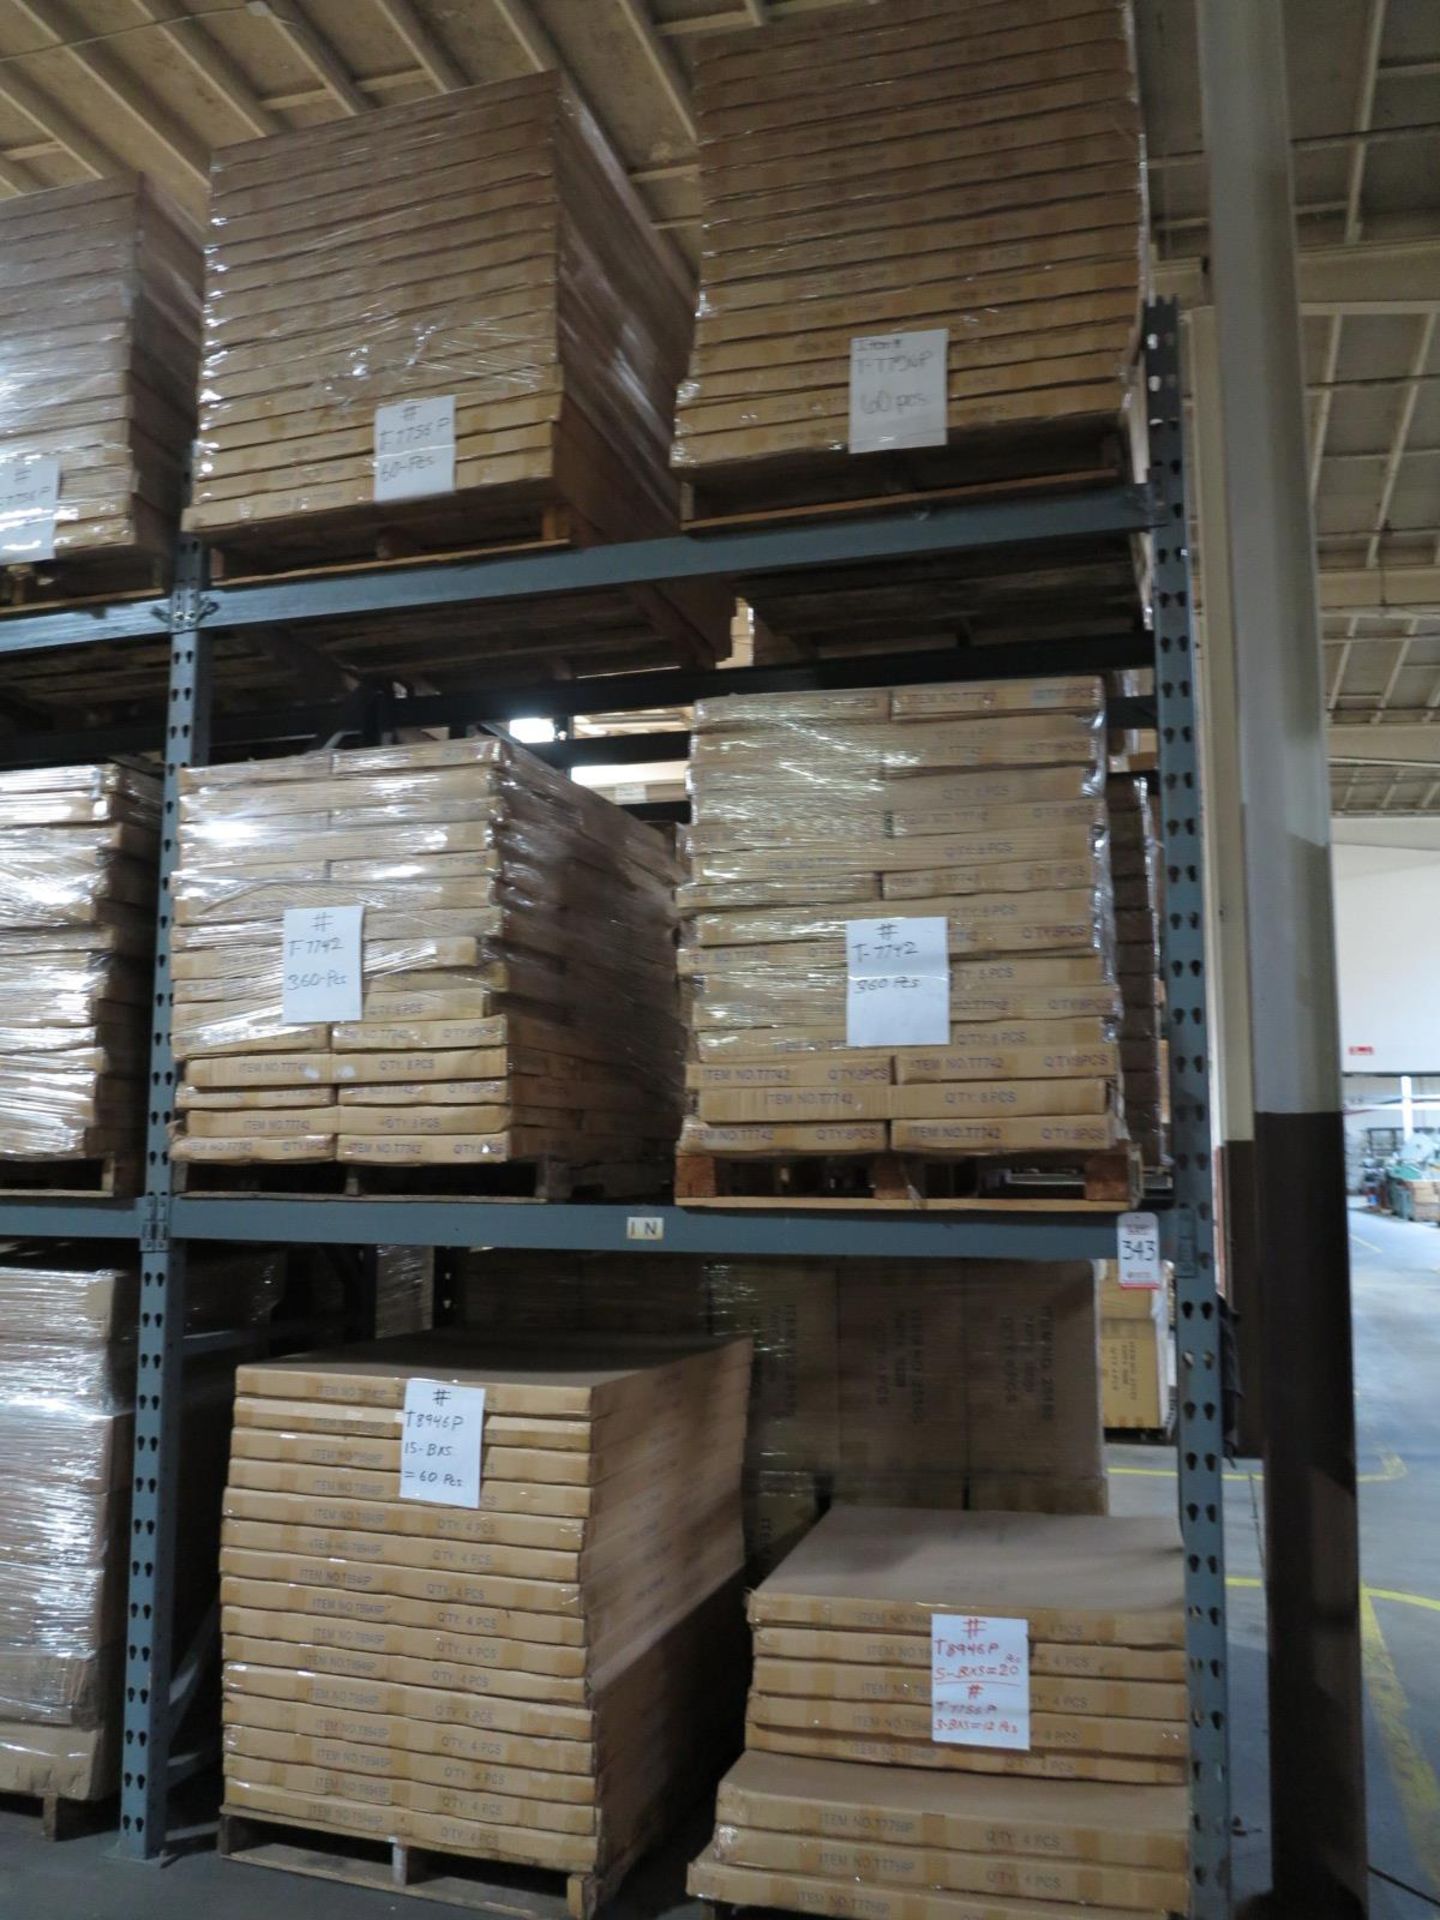 LOT - CONTENTS OF (2) SECTIONS OF PALLET RACK TO INCLUDE: ITEM # T8946, ADJUSTABLE HANGBAR, SUEDE